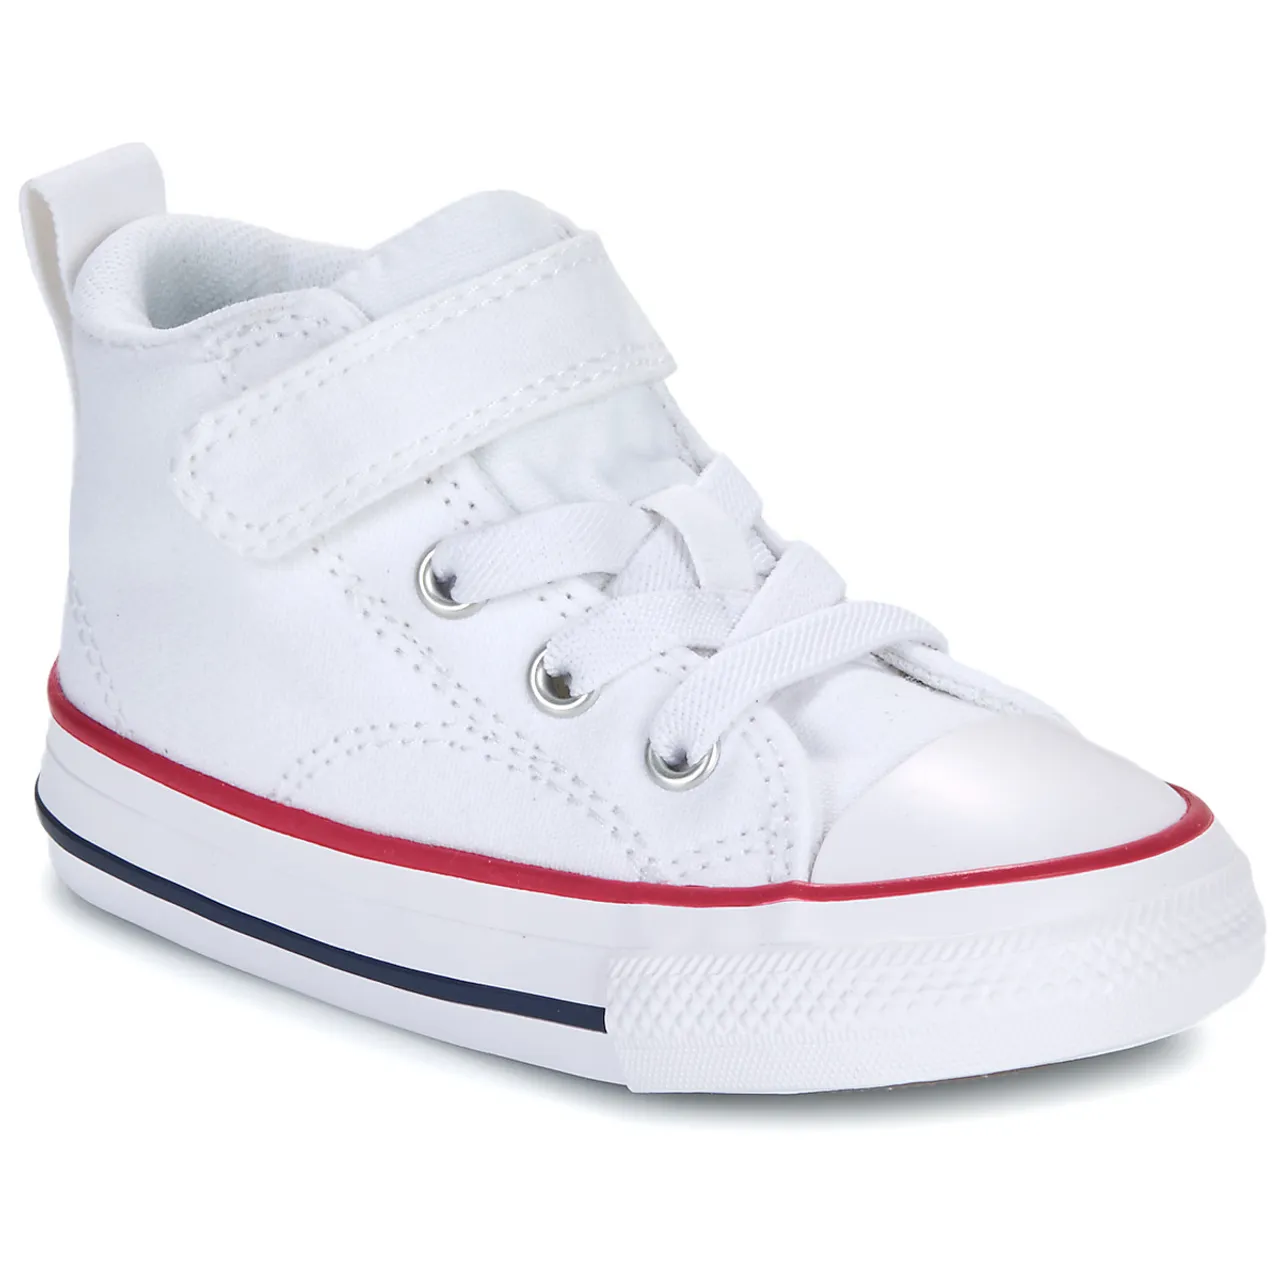 Converse  CHUCK TAYLOR ALL STAR MALDEN STREET  boys's Children's Shoes (High-top Trainers) in White